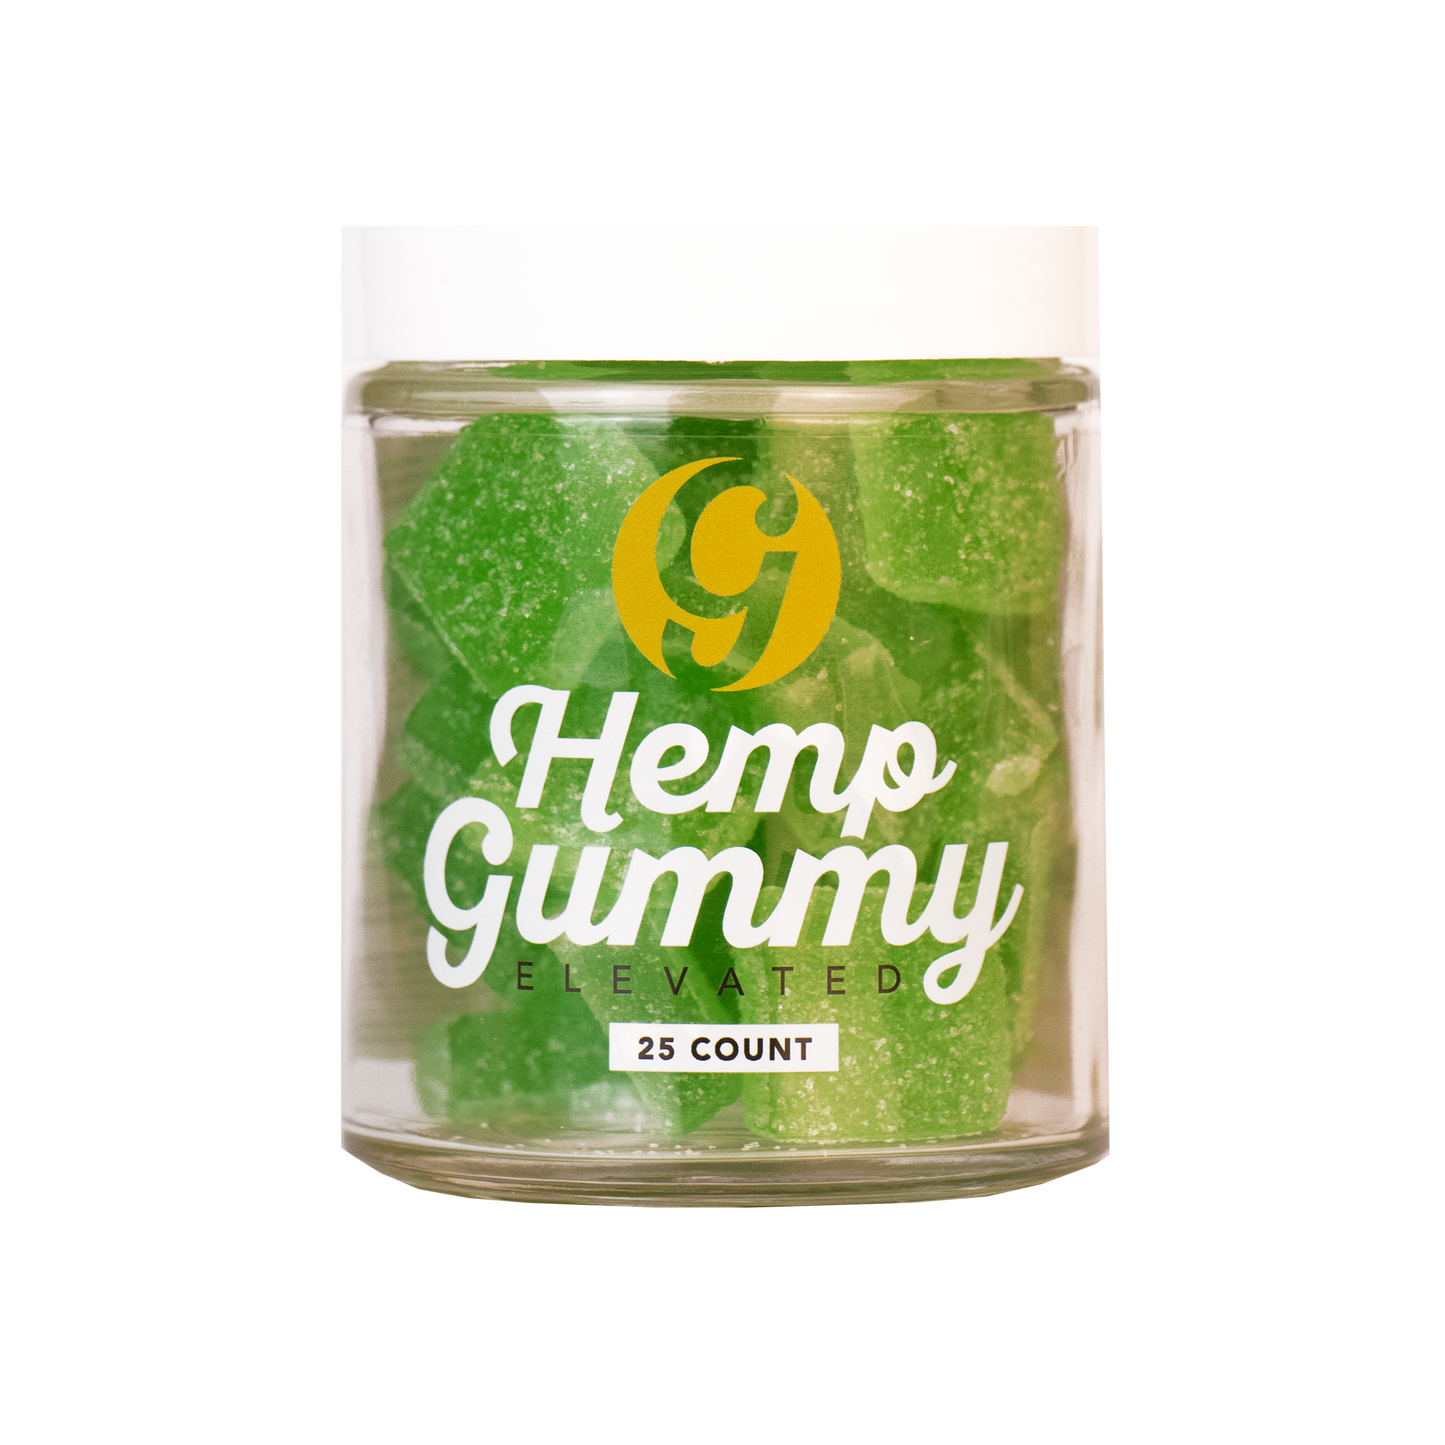 Case of 50MG Delta-8 Hemp Gummy 25 Count Jar (Qty. 12) AVAILABLE IN MULTIPLE FLAVORS